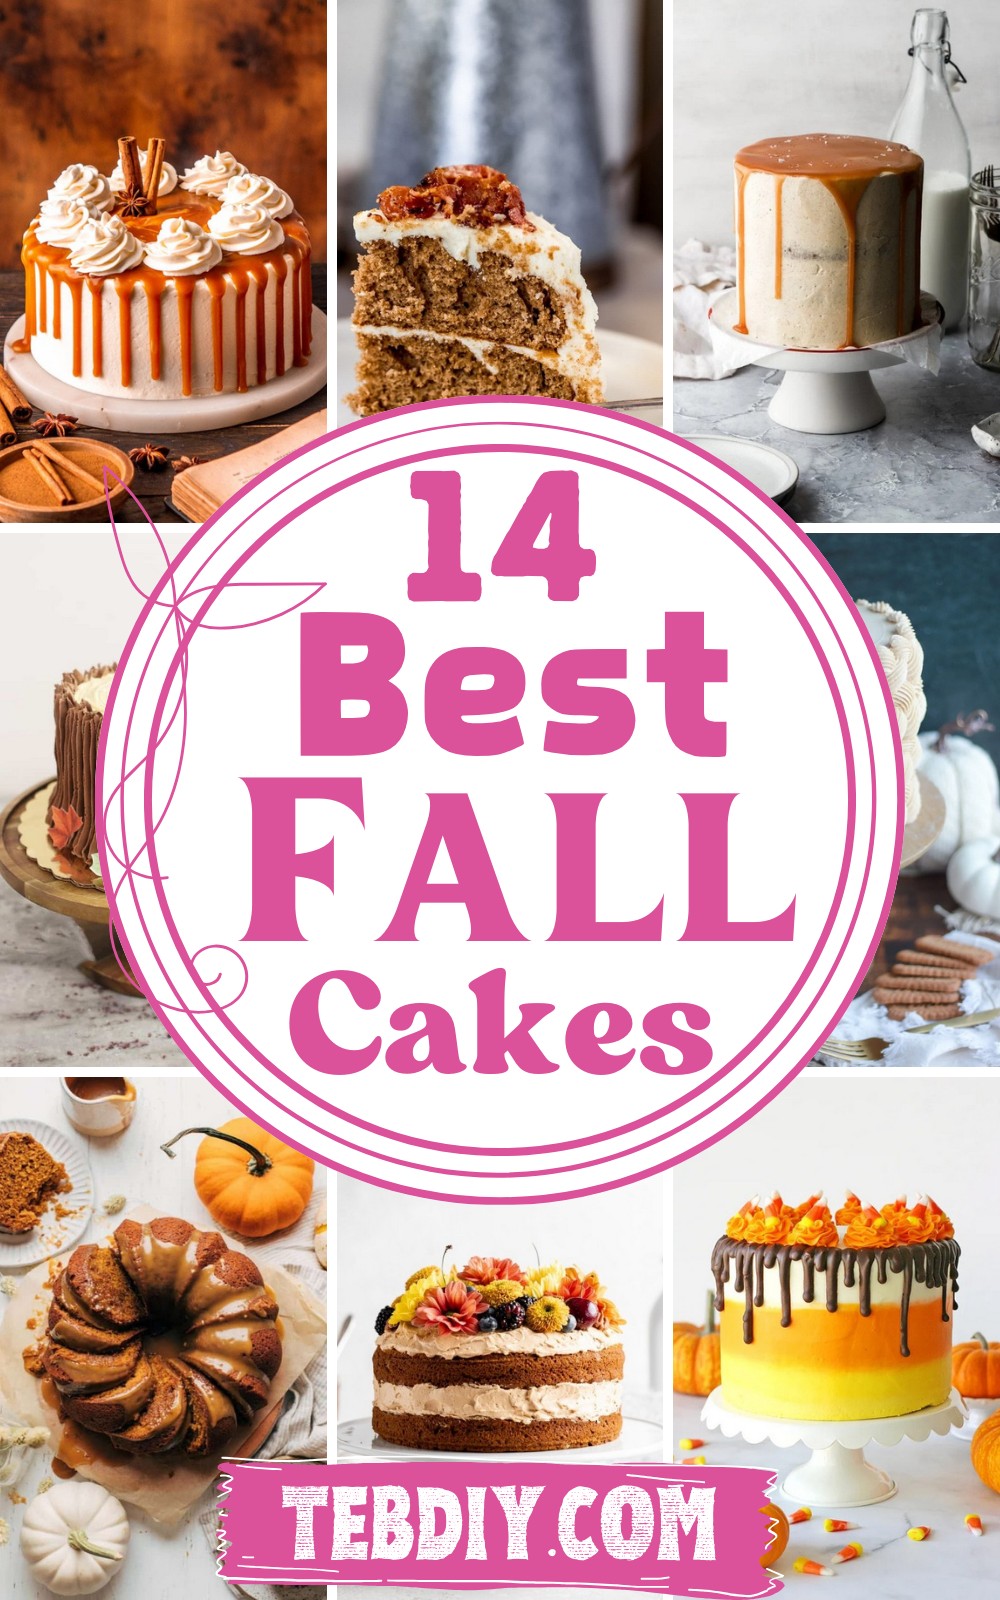 14 Best Fall Cakes